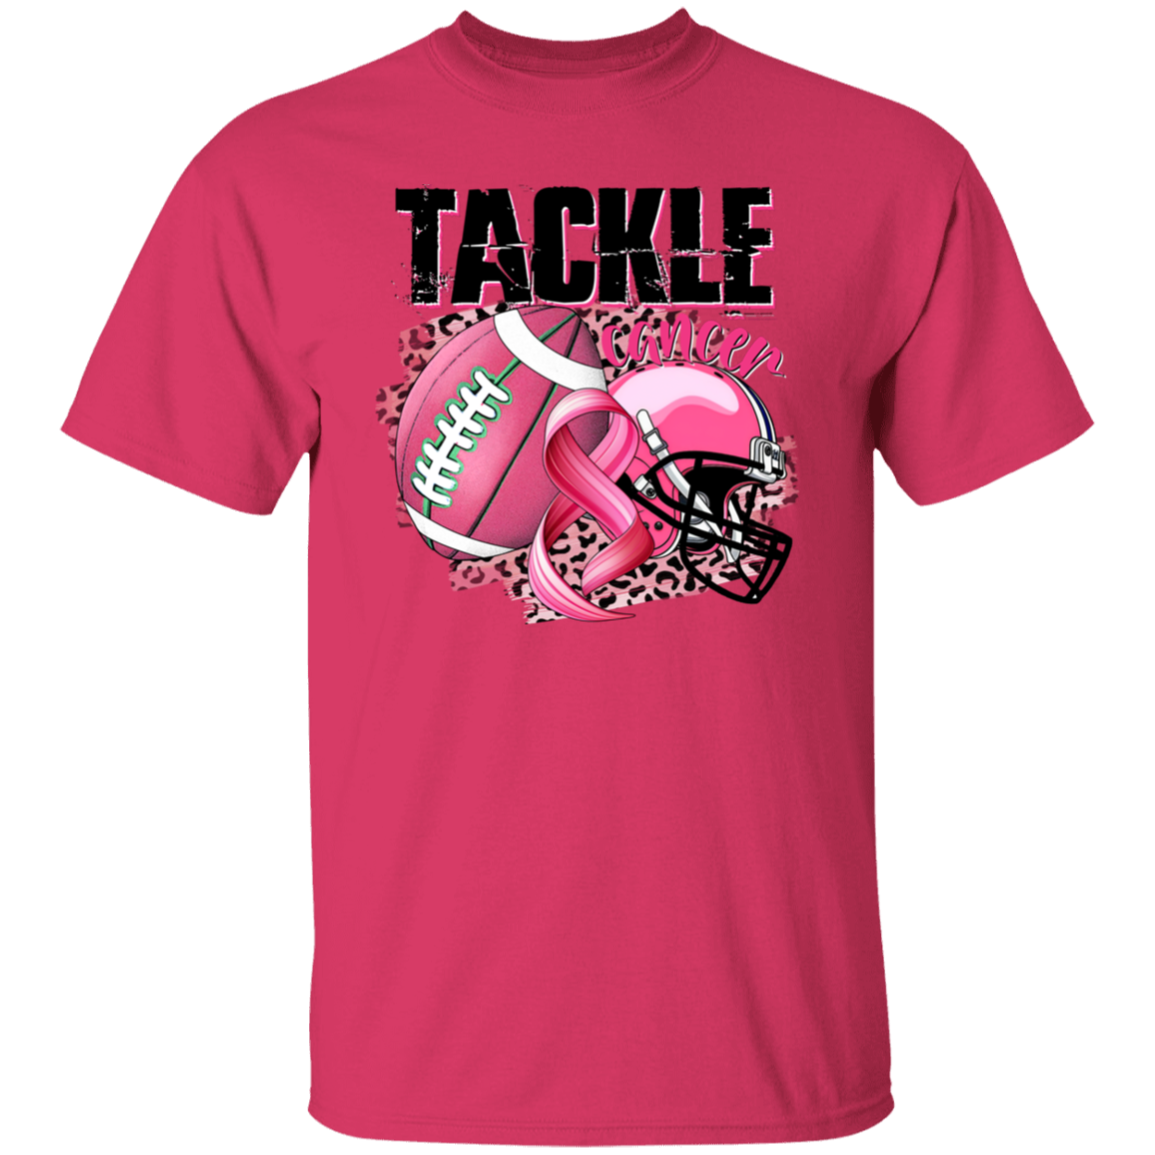 Tackle Cancer Breast Cancer Awareness  T-Shirt